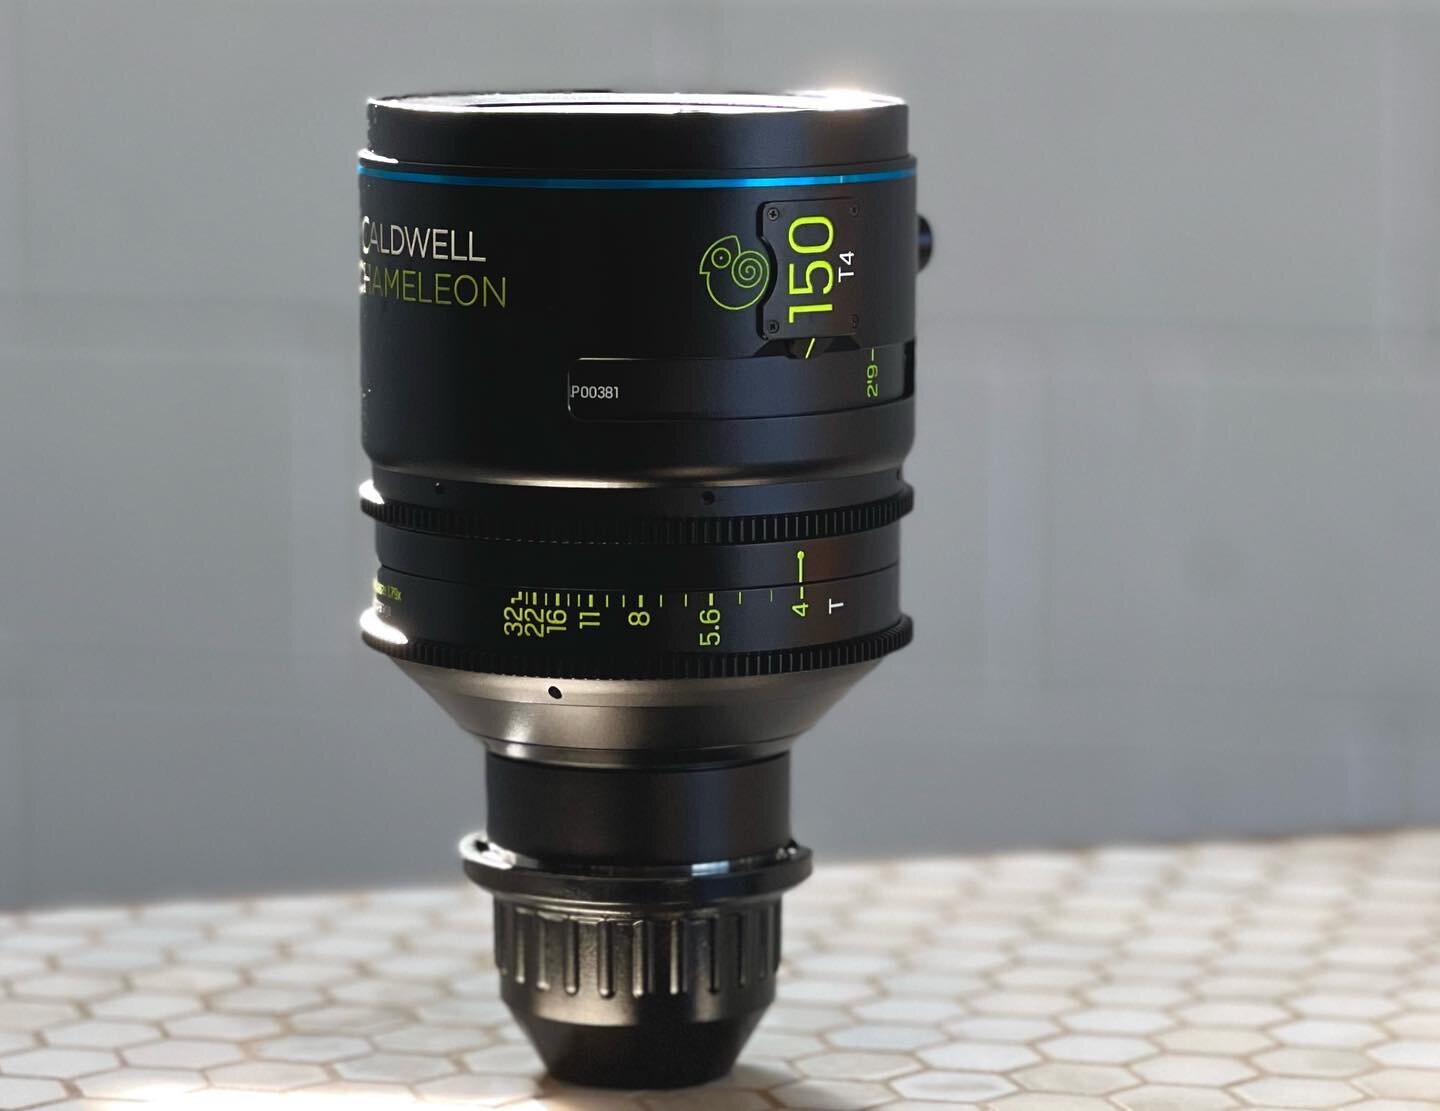 Caldwell Chameleon 1.79x 150MM has landed. Love a CU anamorphic lens! 32 and 60 are also coming soon to complete our set.